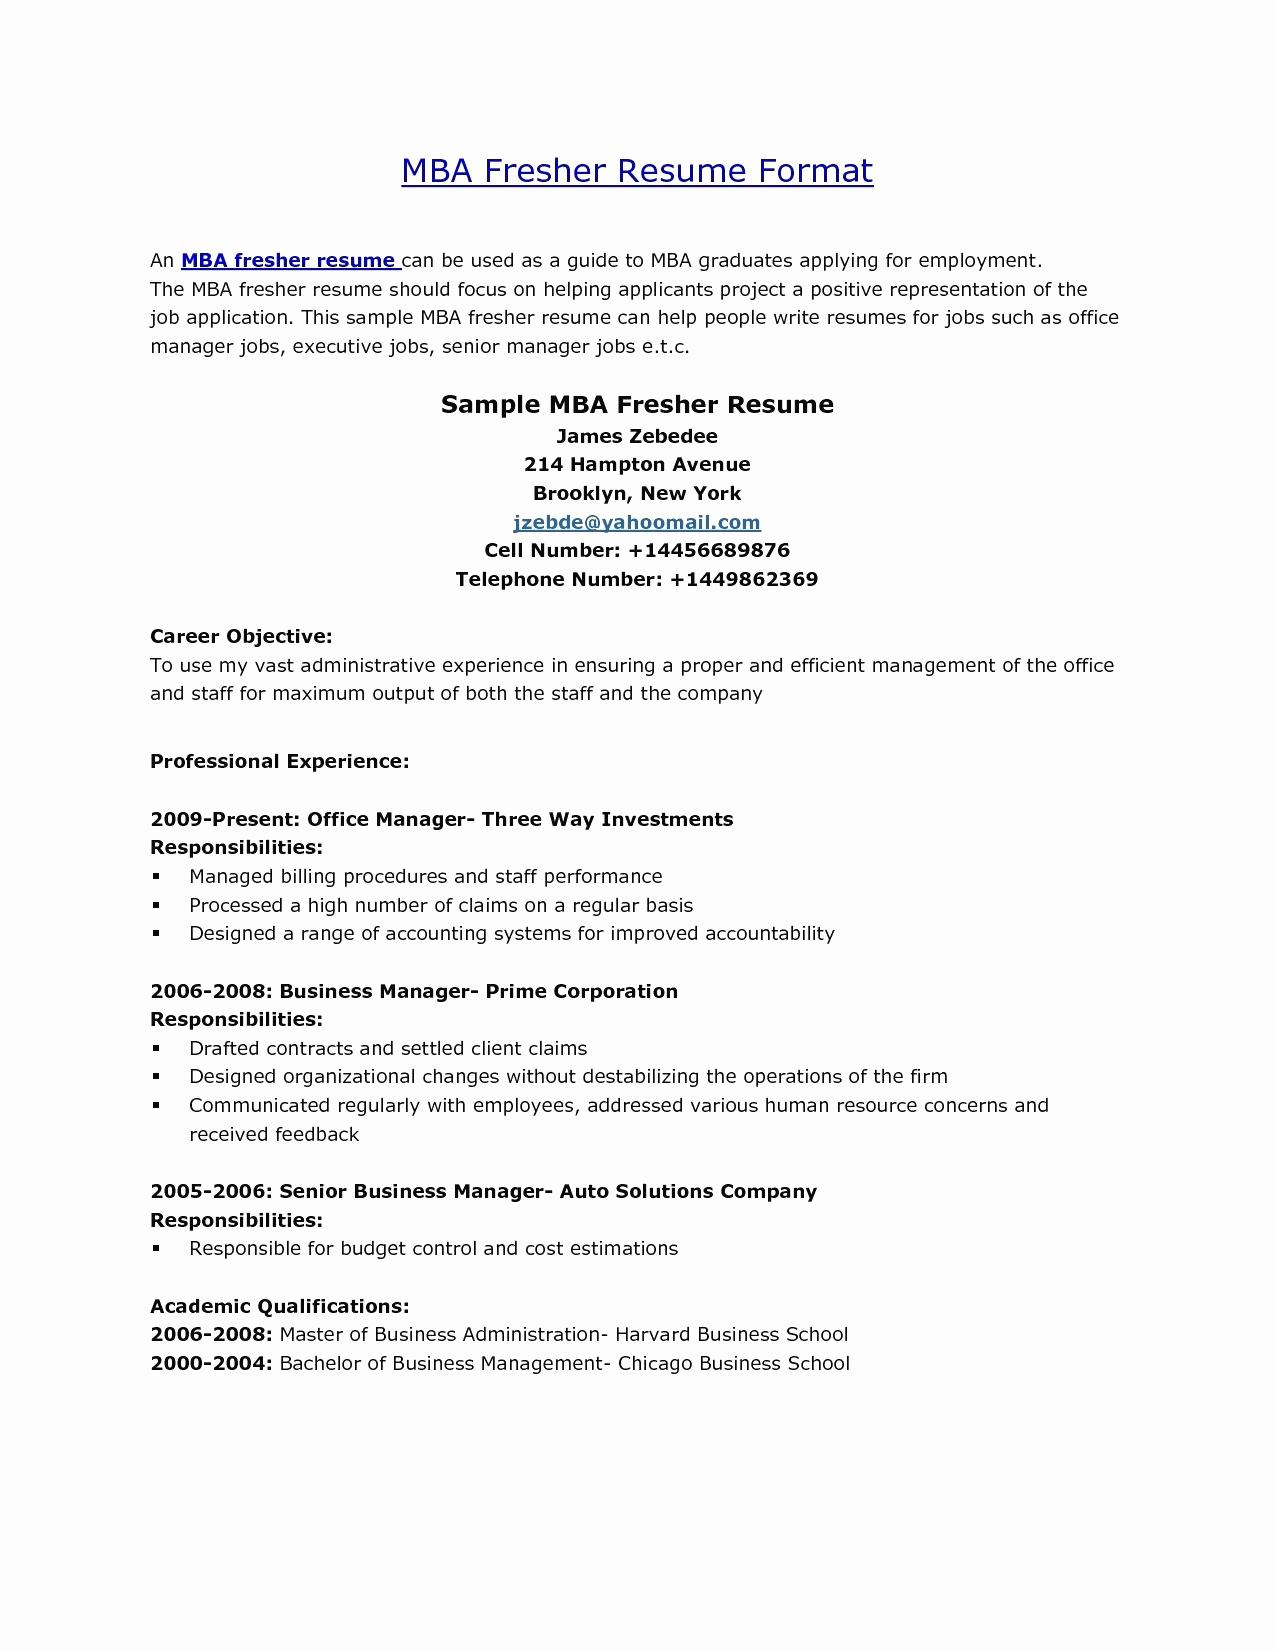 Resume Templates For Mba Freshers • Business Template Ideas